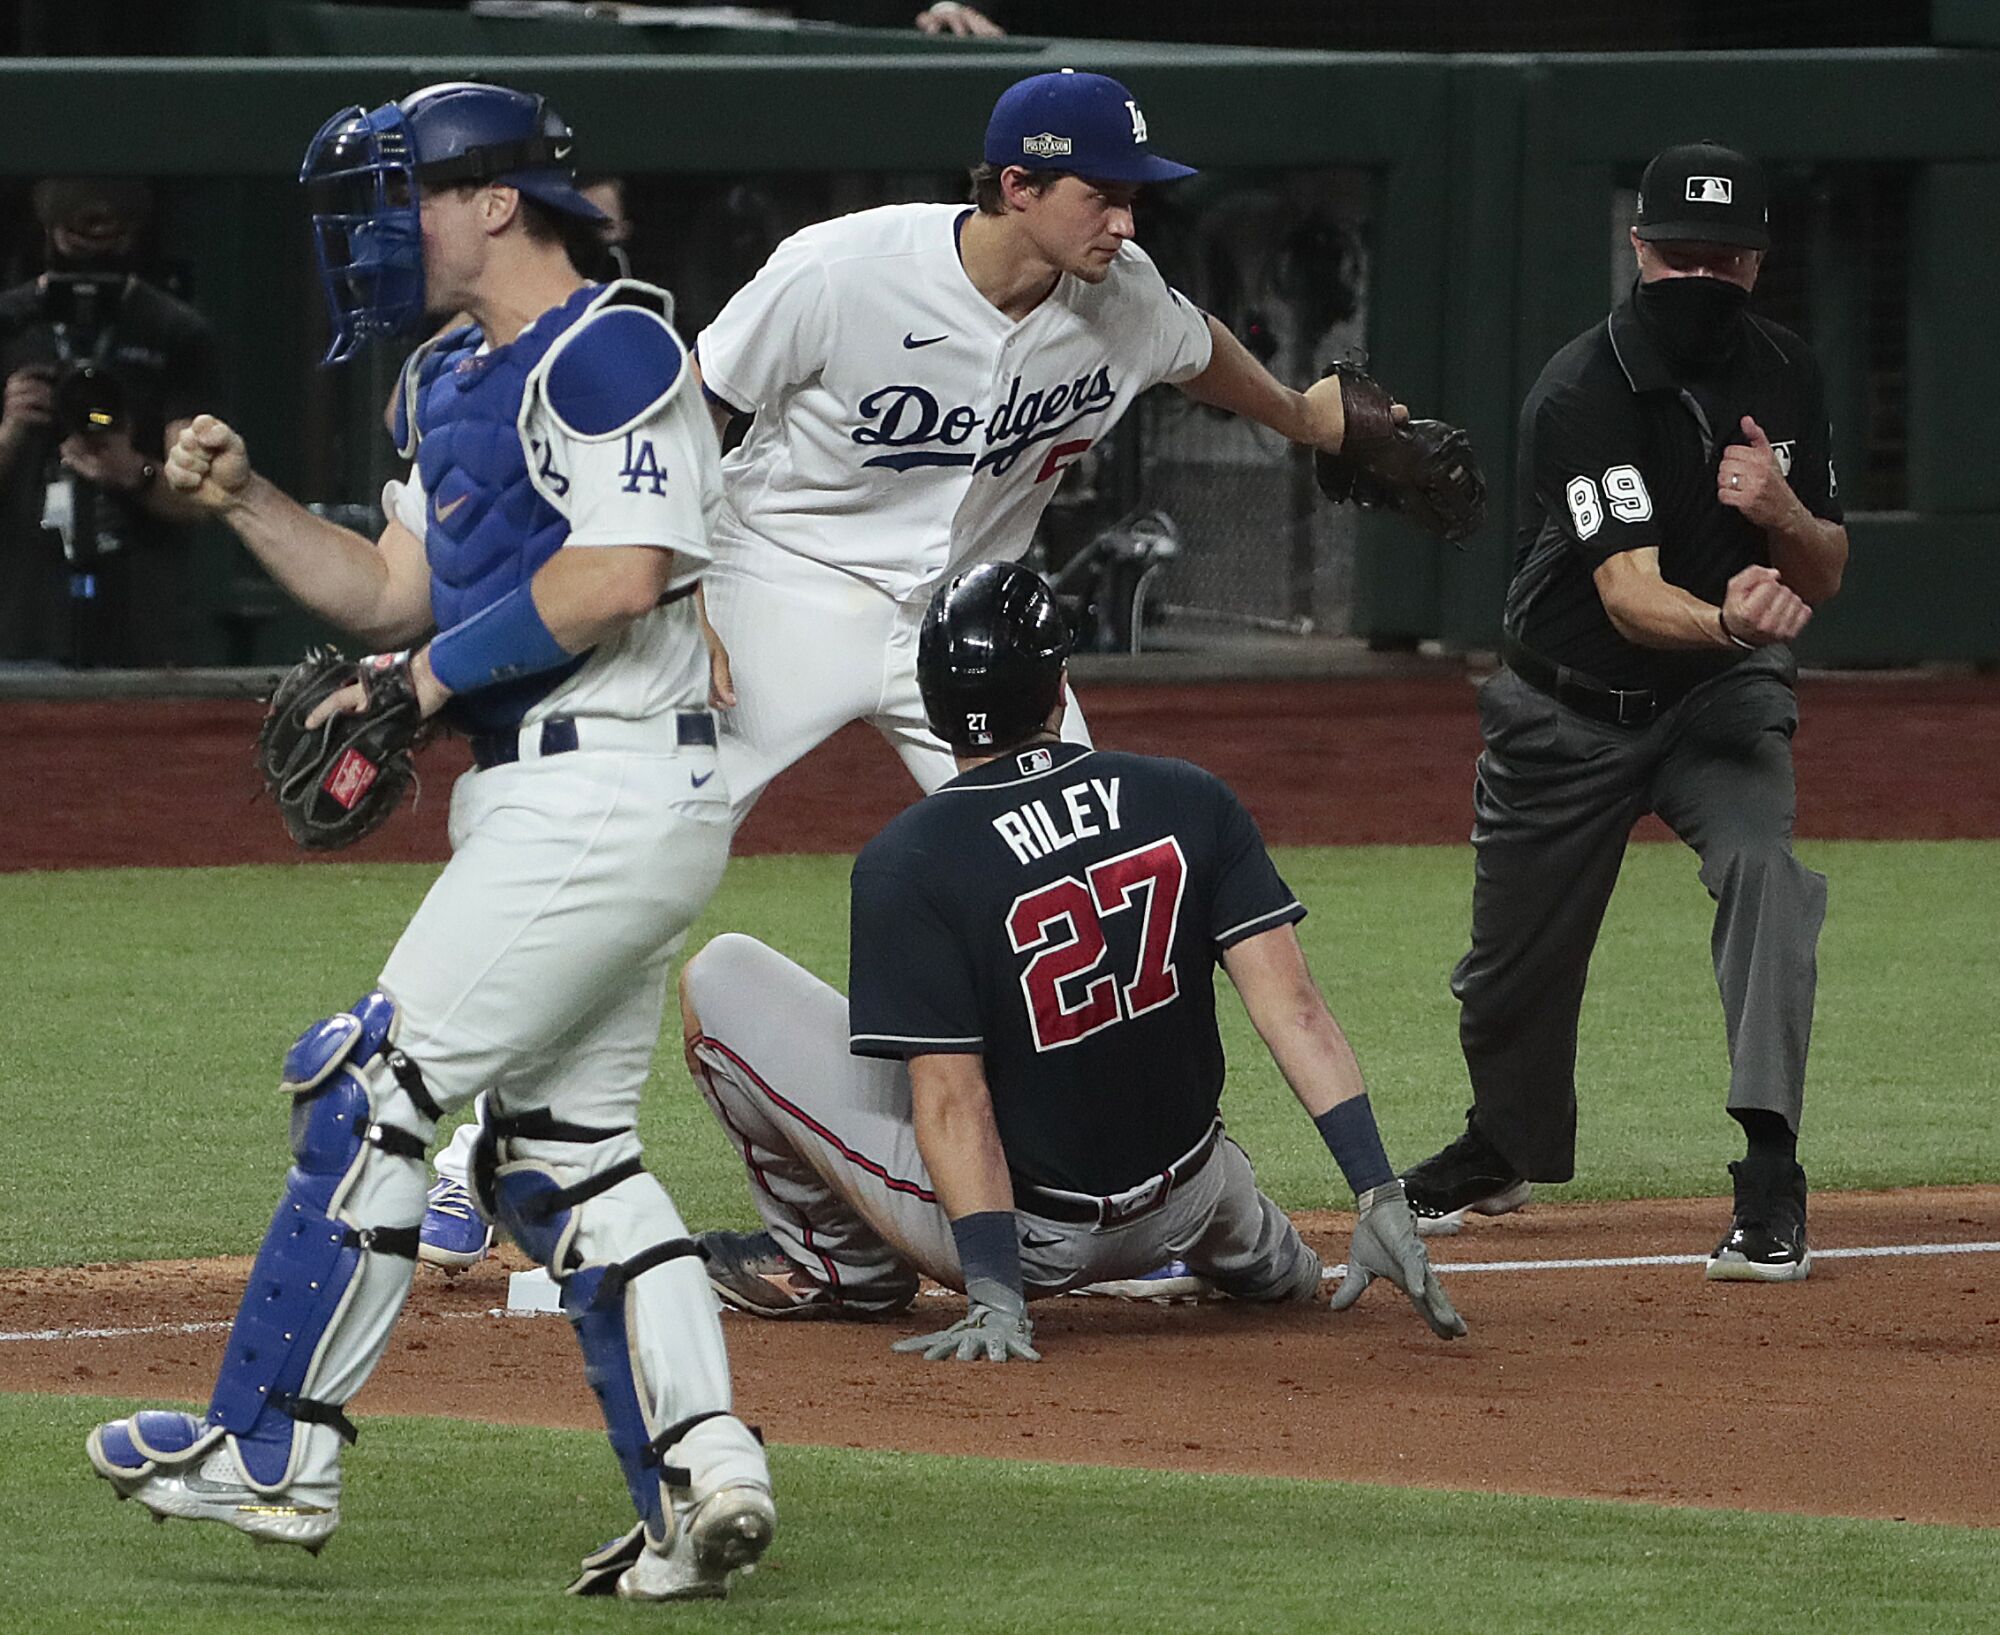 Catcher Will Smith celebrates as the ump calls Austin Riley out after a tag by Corey Seager at third.